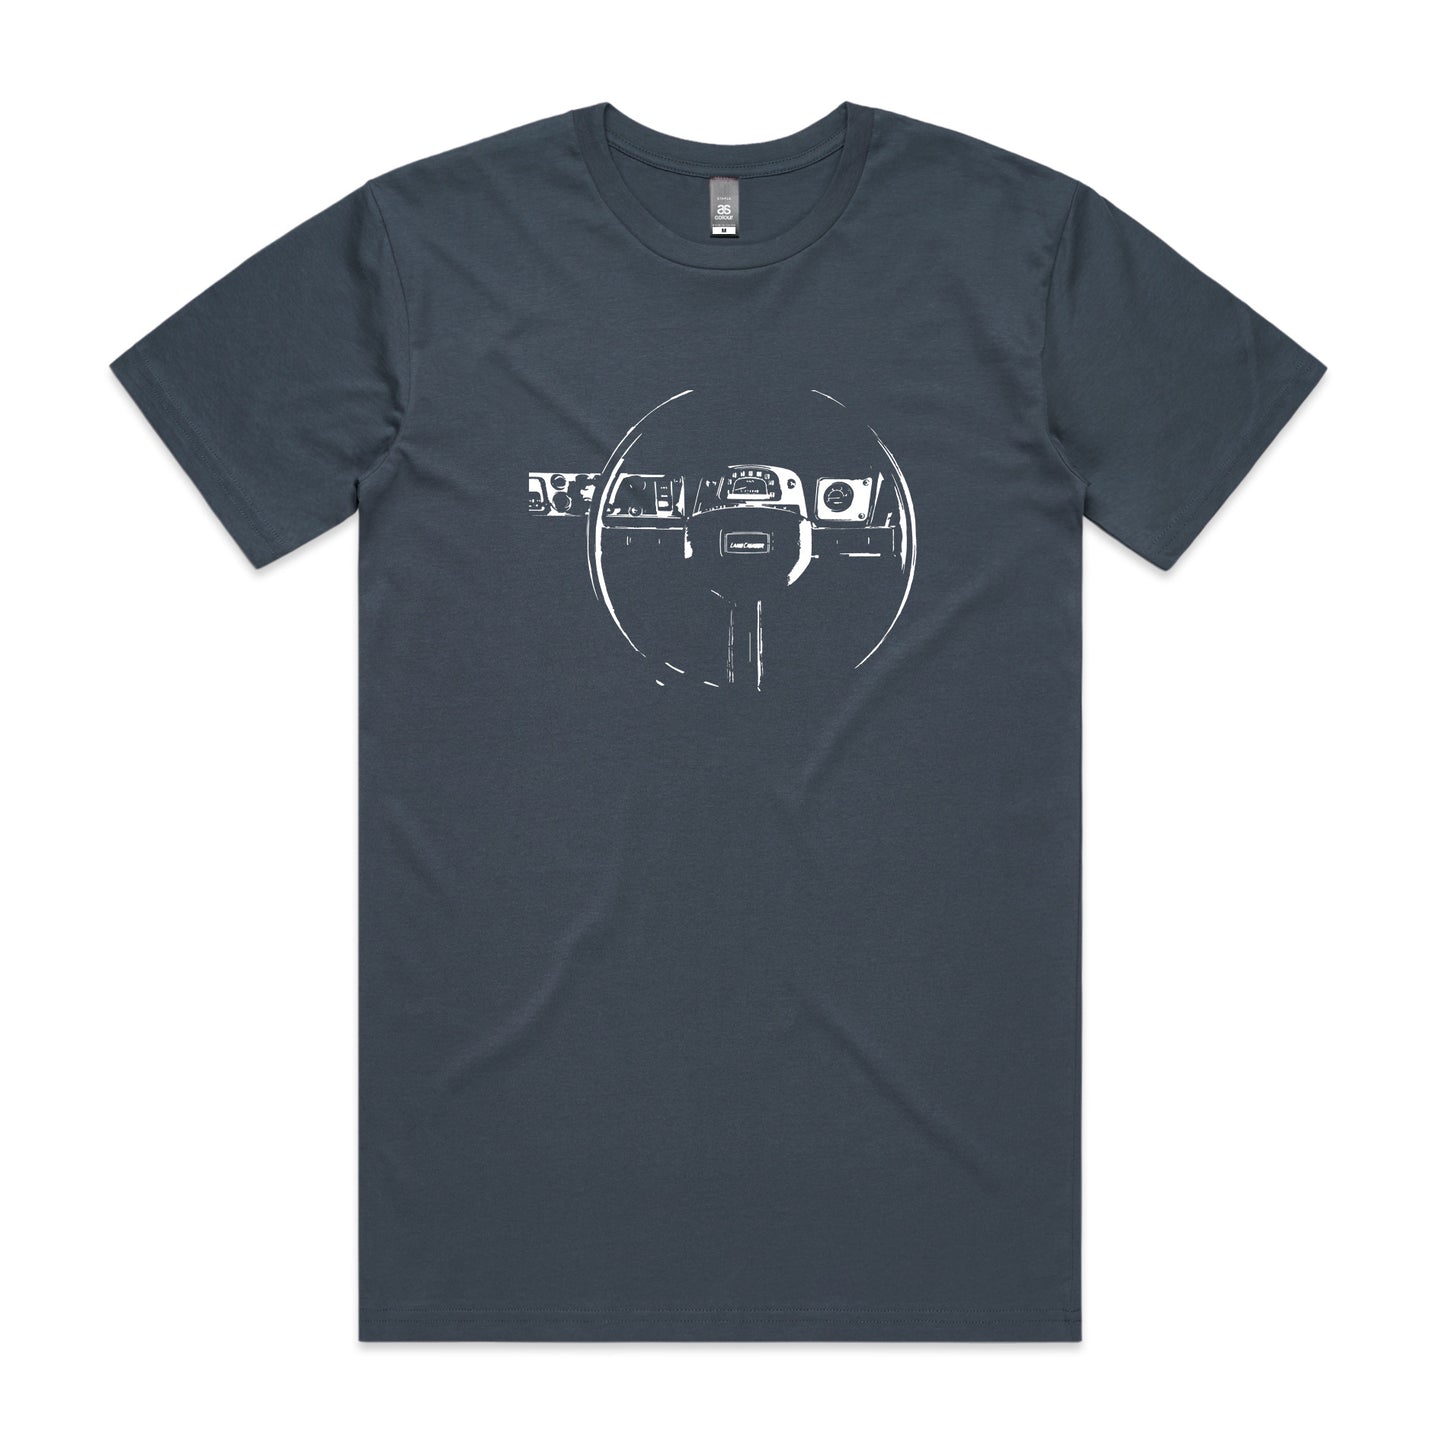 FJ40 dash t-shirt in petrol blue with a Toyota LandCruiser dashboard printed on the front